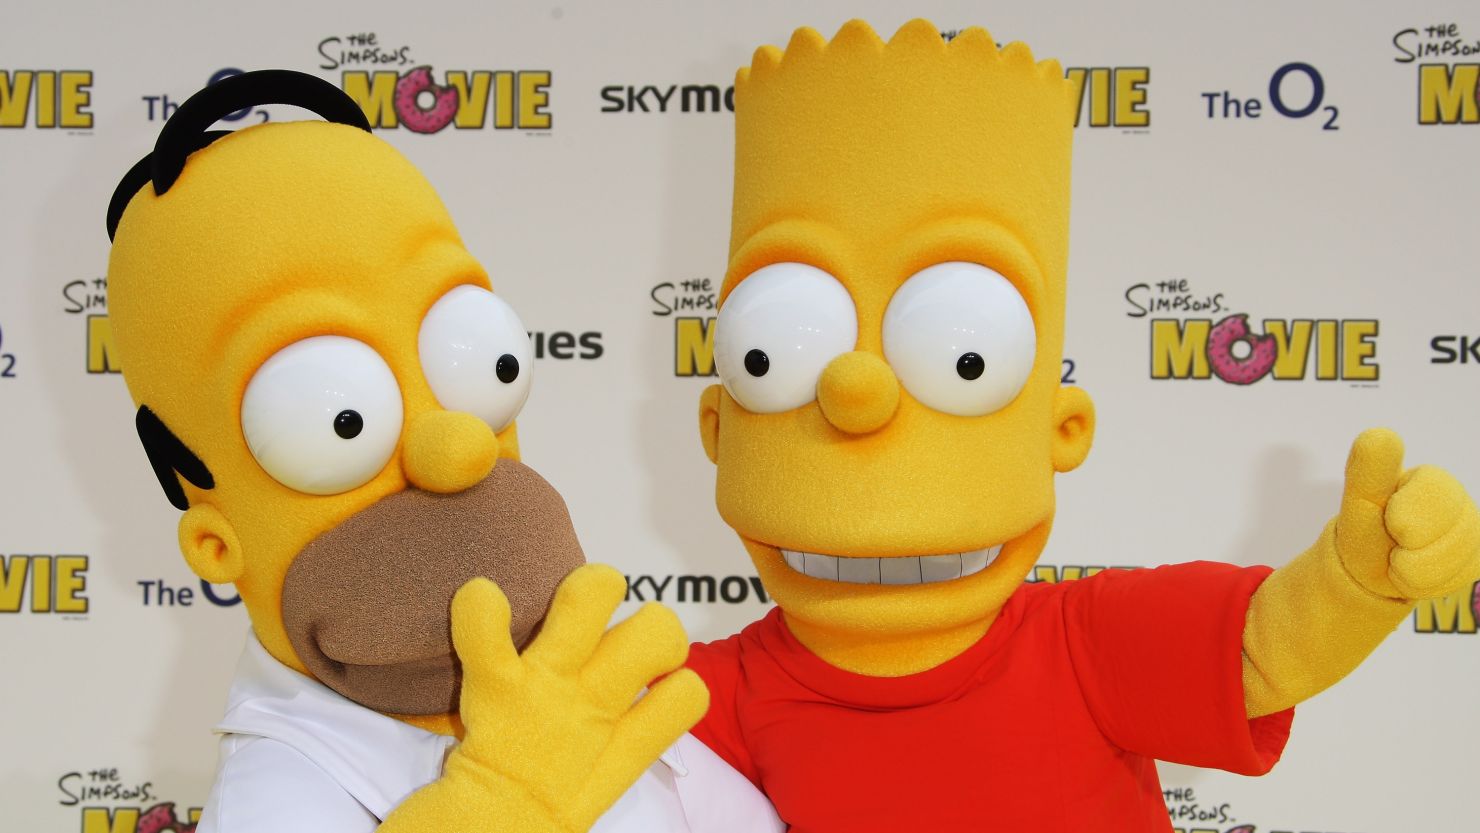 Characters Homer (L) and Bart Simpson (R) arrive at the Simpsons movie premiere in London, England on July 25, 2007.